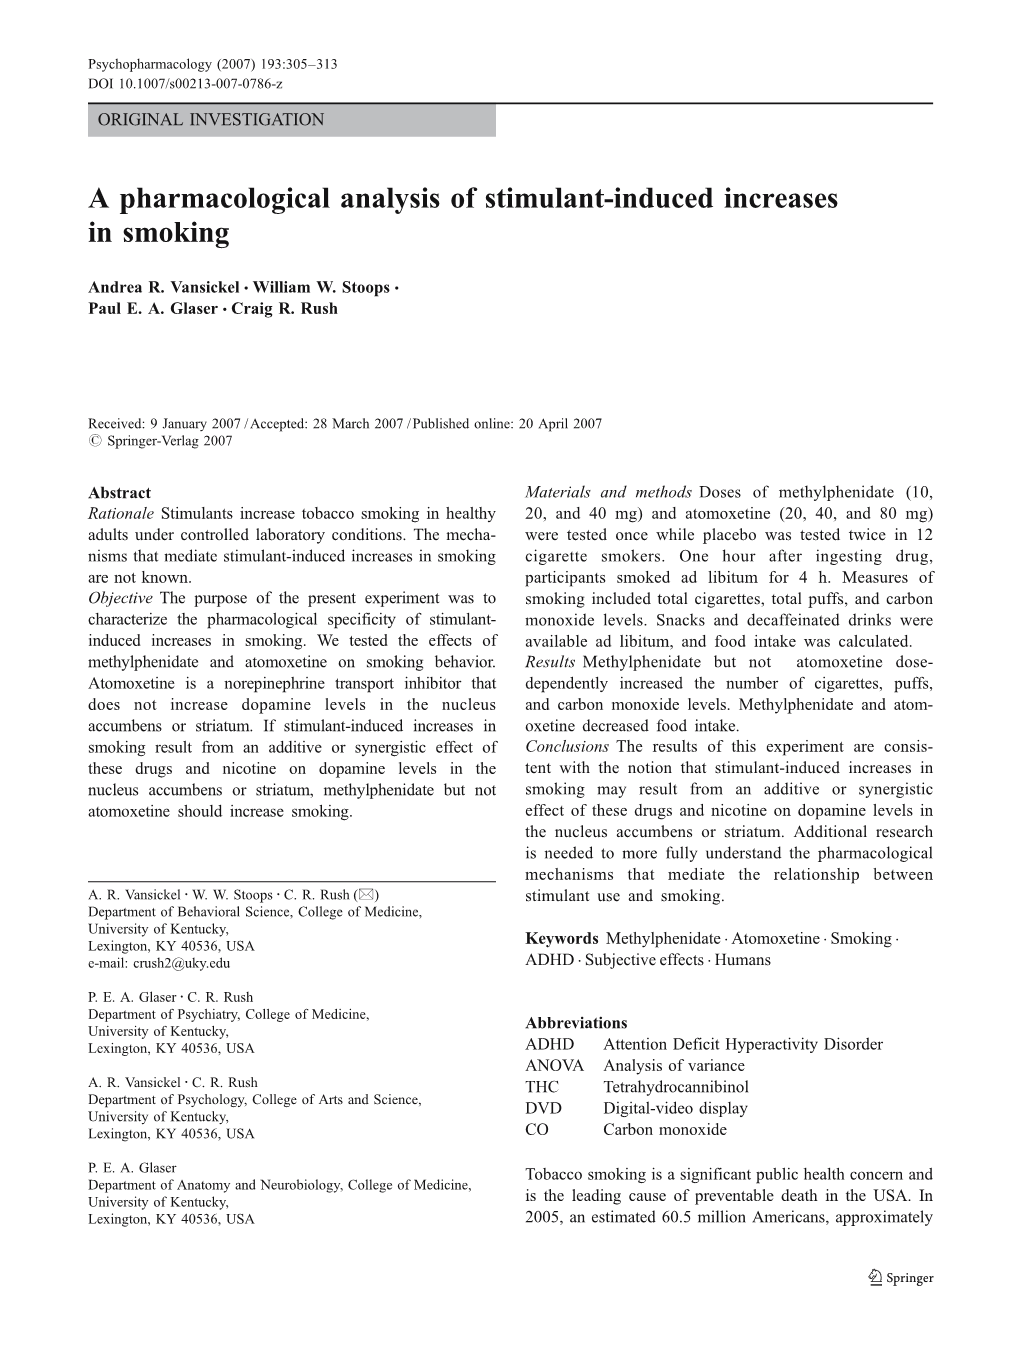 A Pharmacological Analysis of Stimulant-Induced Increases in Smoking